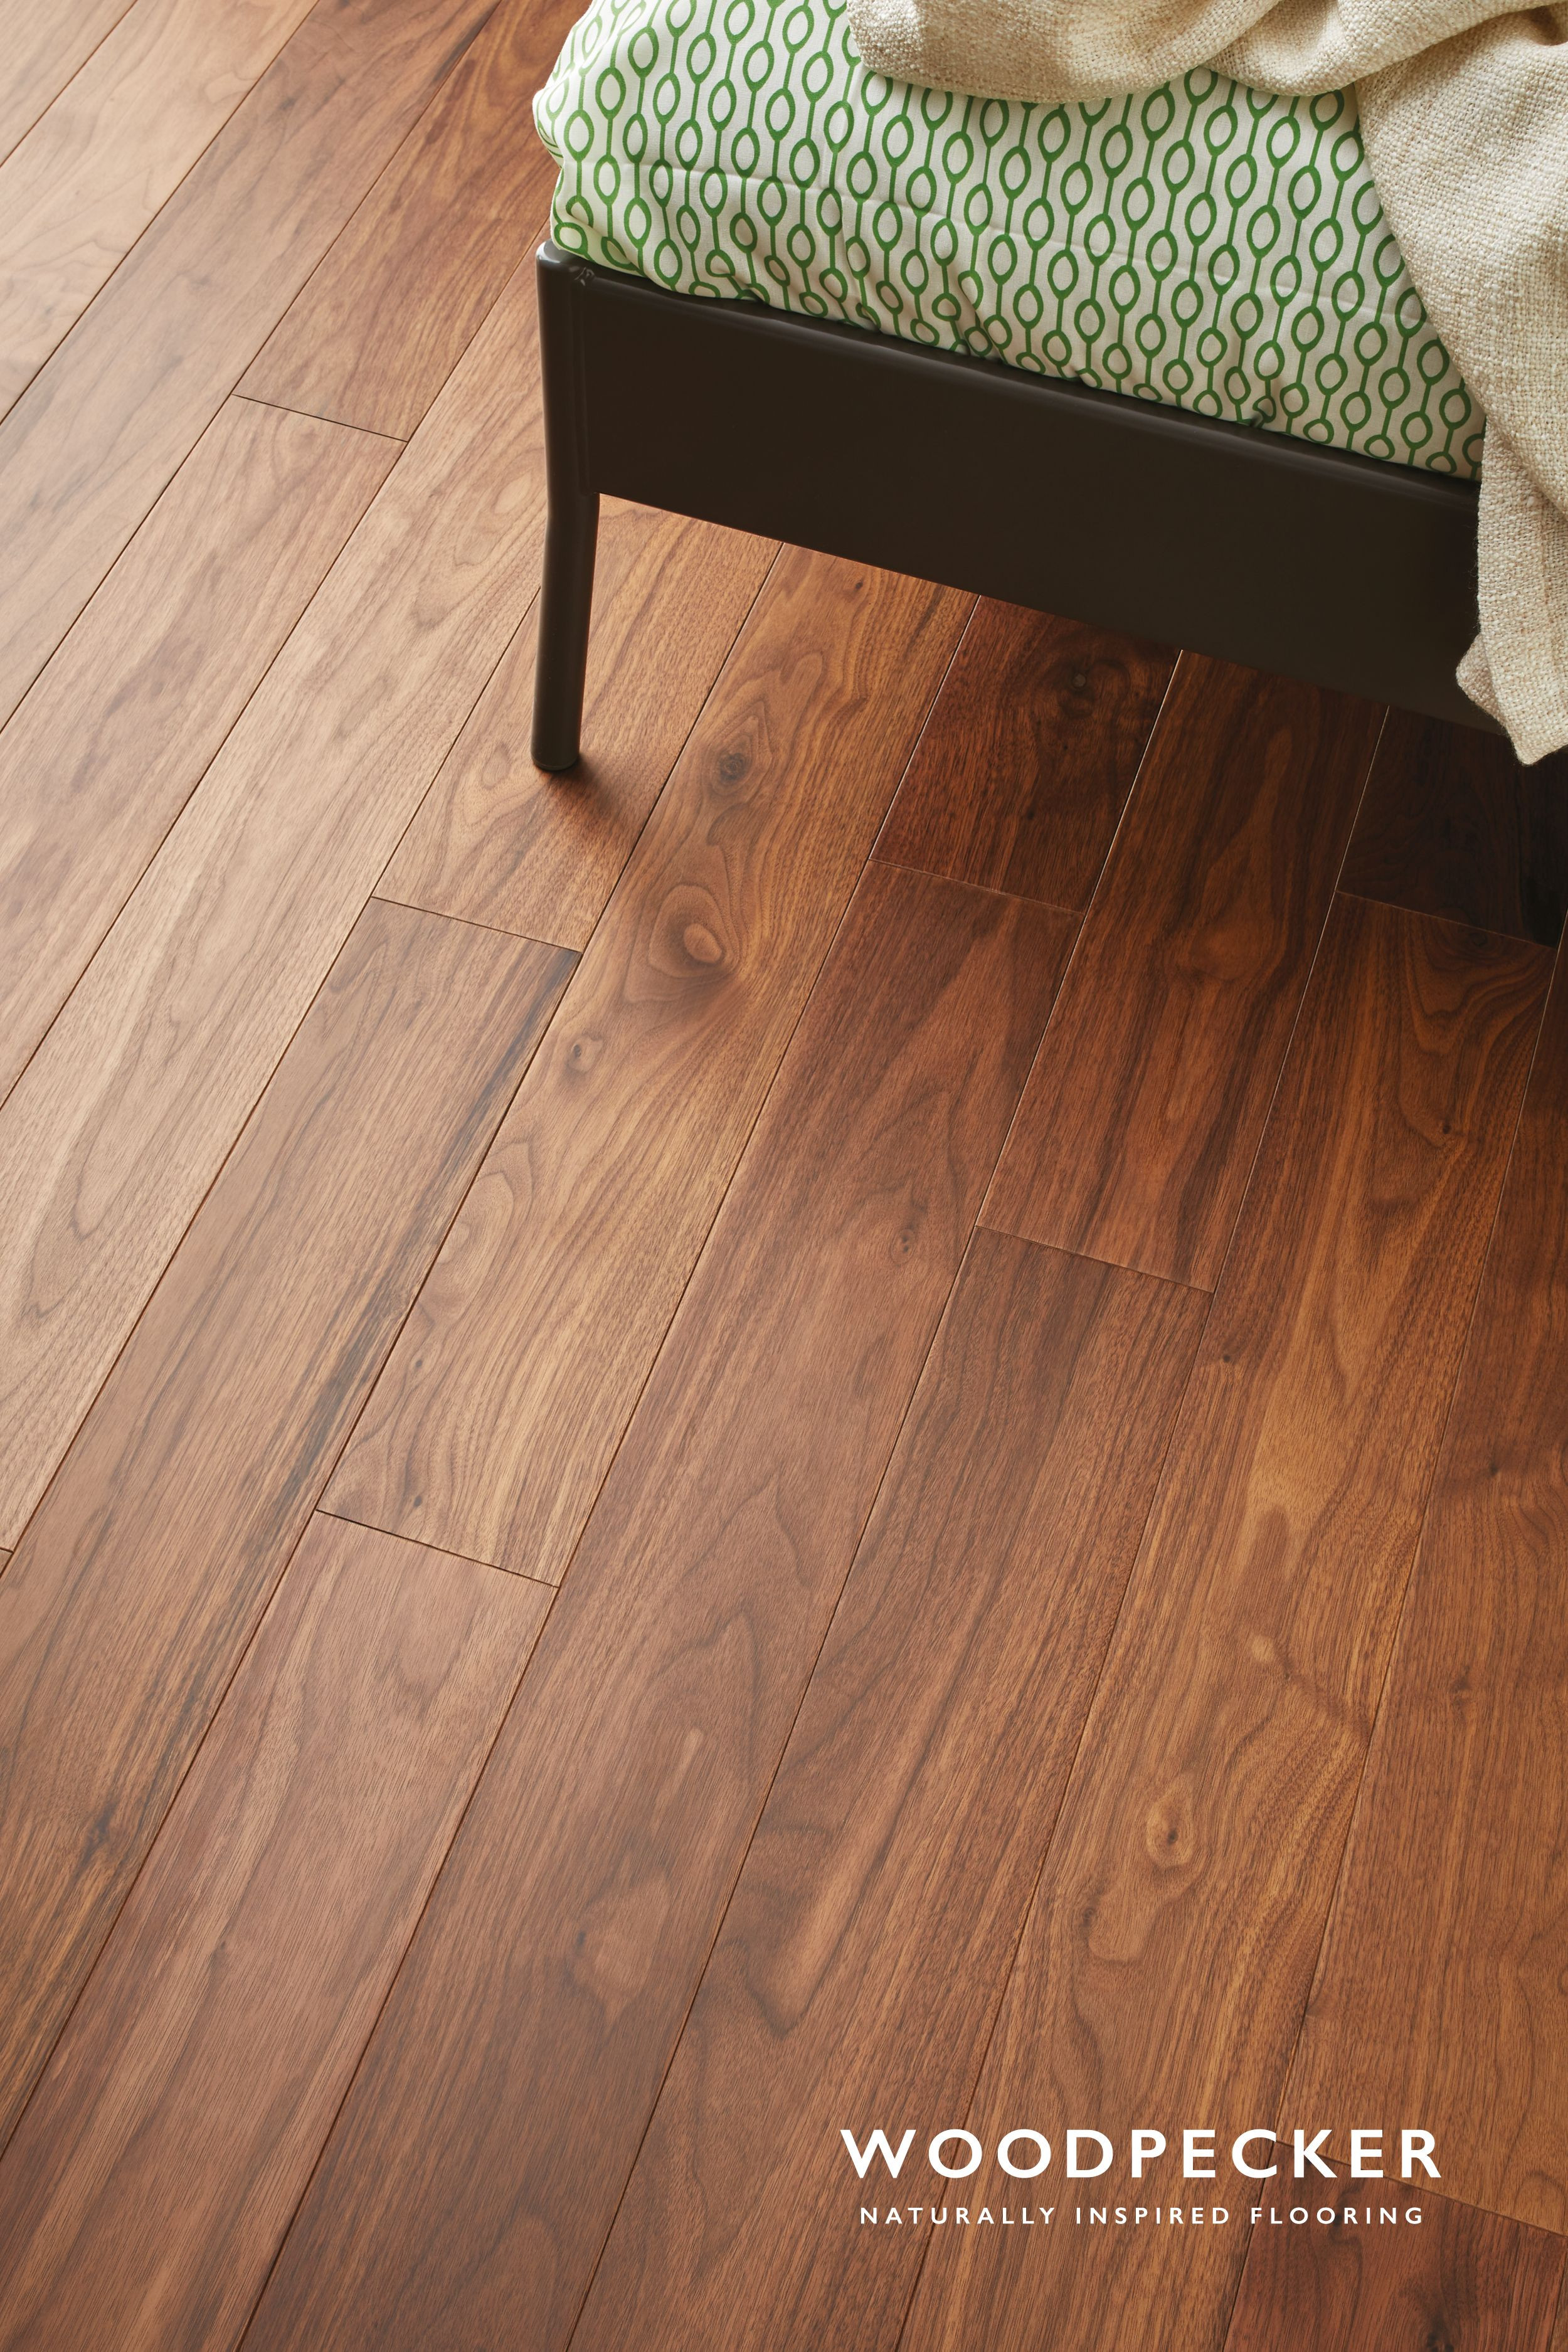 Gr Hardwood Floors Of Raglan Walnut Inspired Home Pinterest Wood Flooring Woods with Walnut Flooring is Exotic and Exciting with Wide Flowing Grain Patterns and A Medley Chocolate